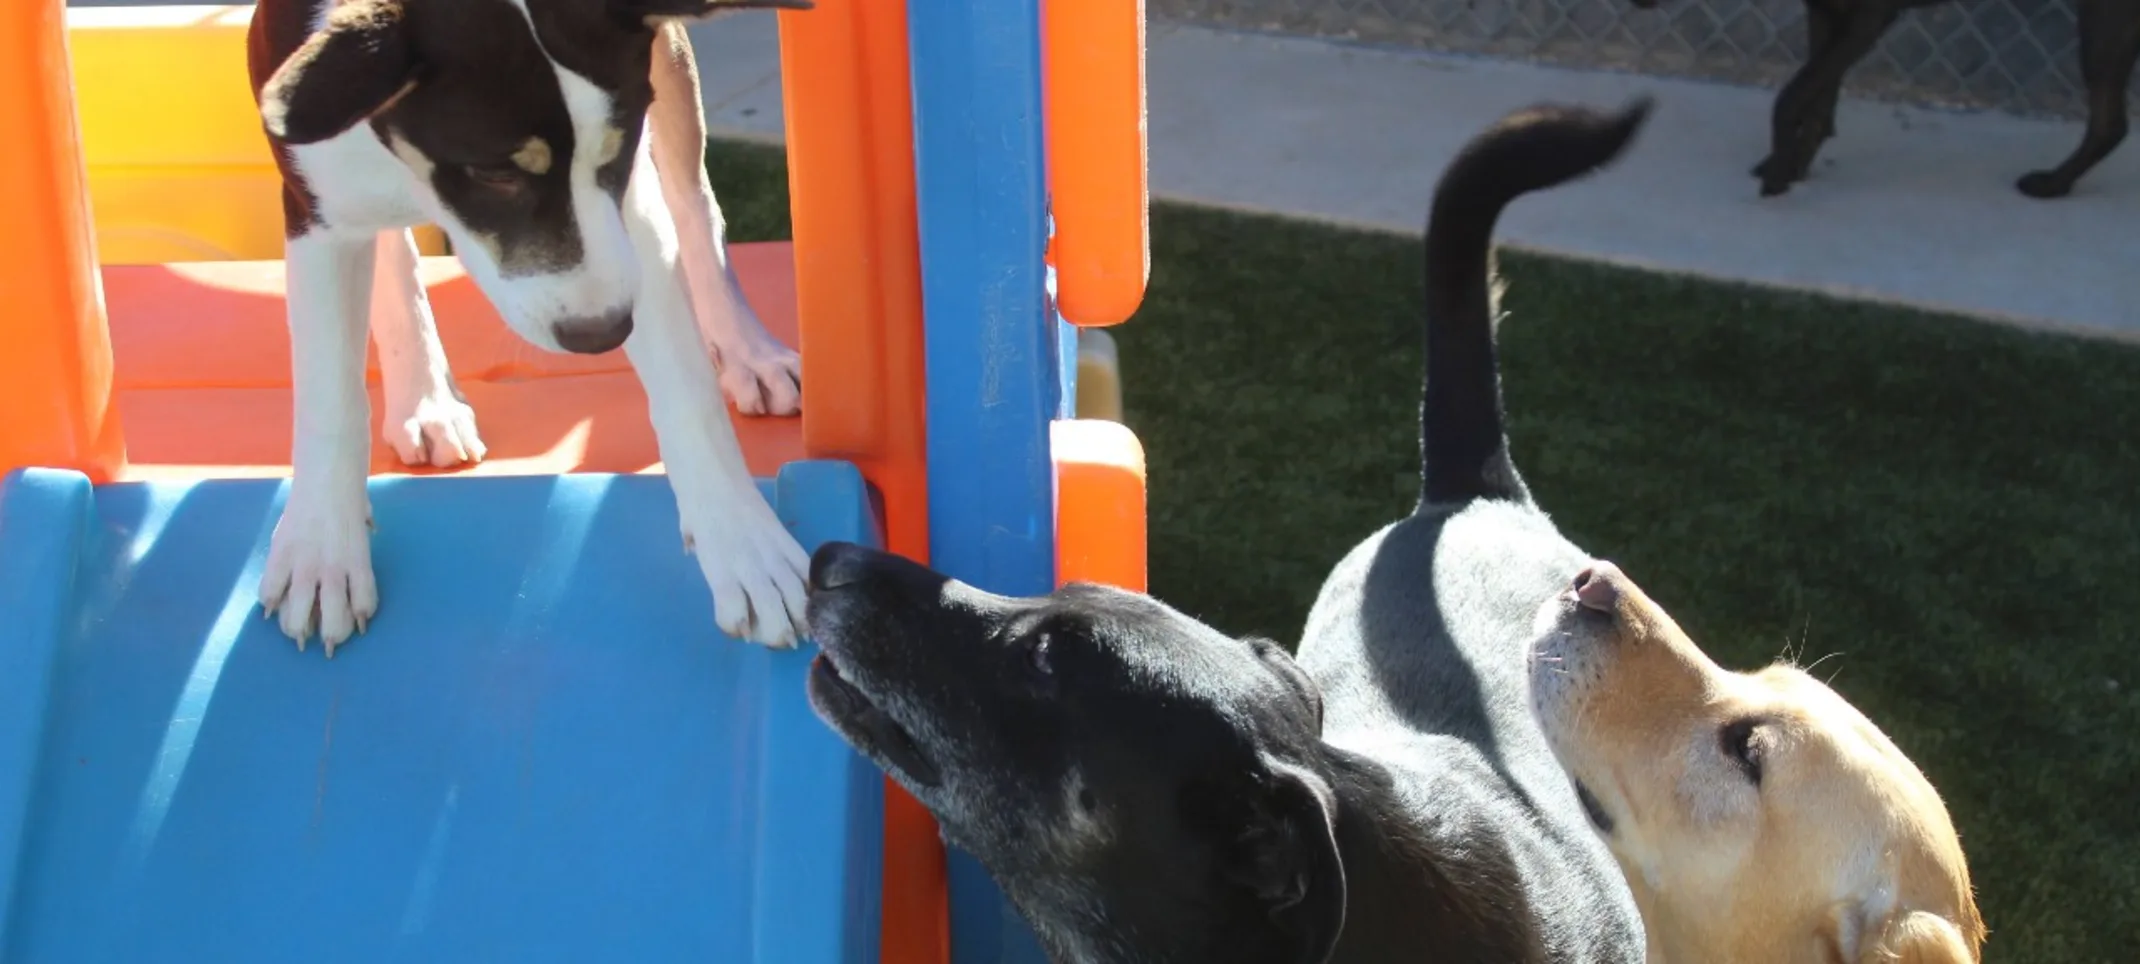 Puppy on a plastic slide while 2 labs look.